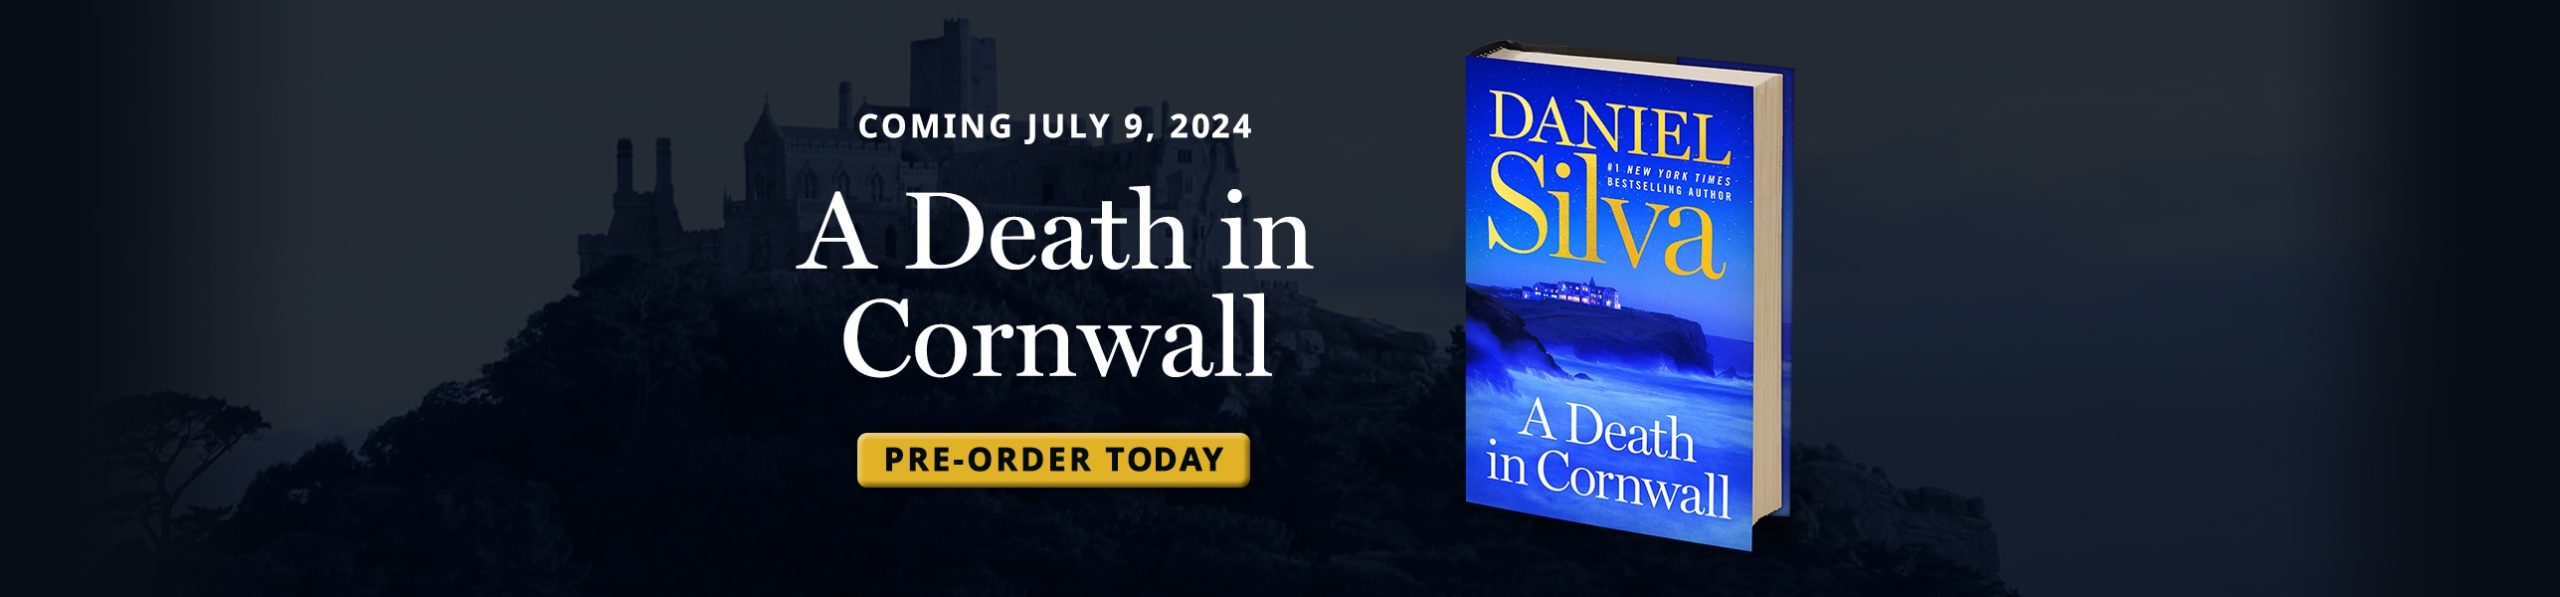 A Death in Cornwall on sale July 9, 2024